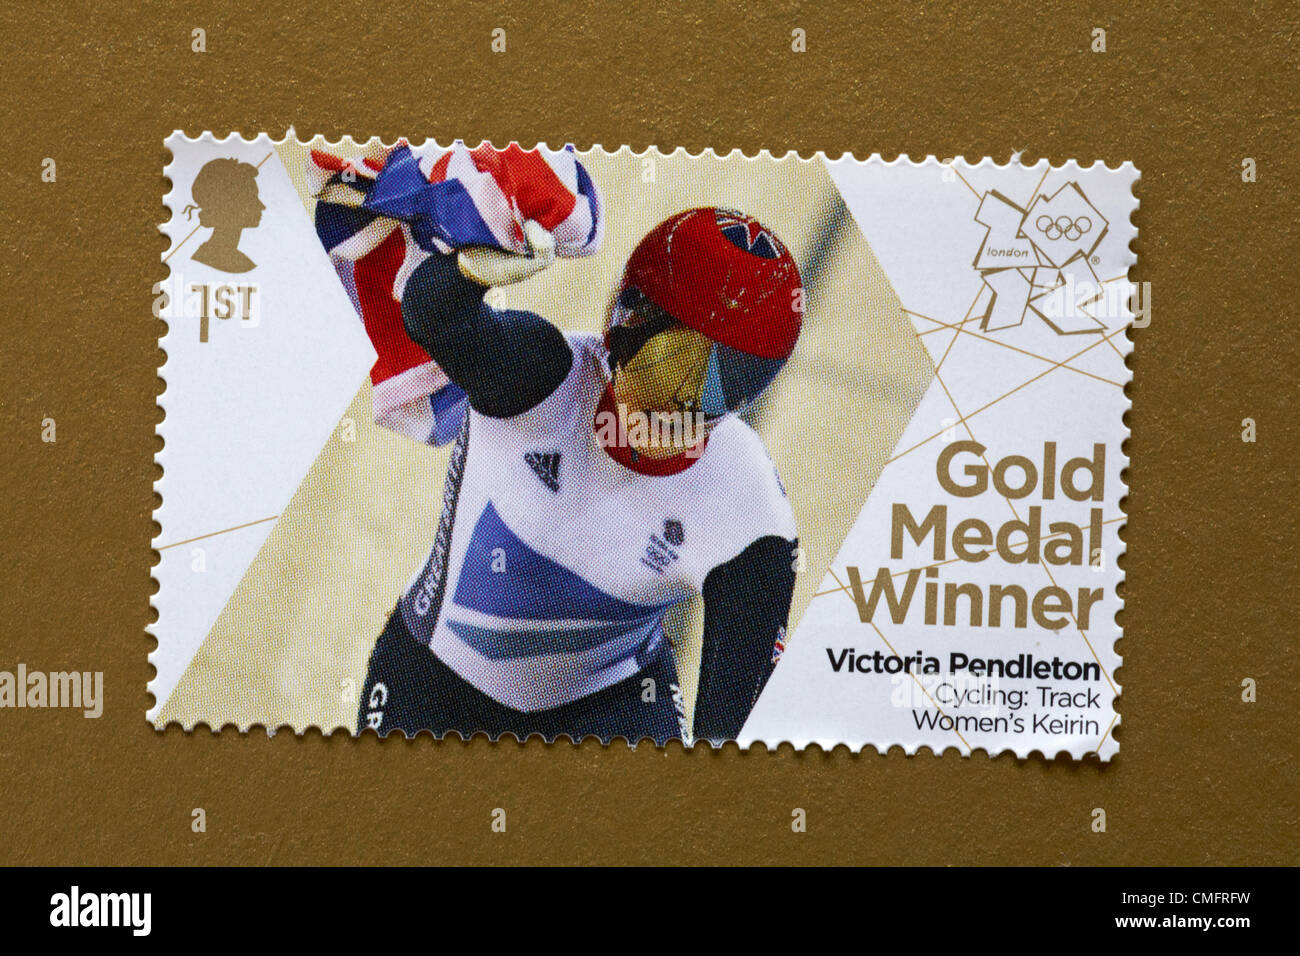 UK Saturday 4 August 2012. Stamp to honour gold medal winner Victoria Pendleton in the Cycling Track Women's Keirin event. Stamp purchased and stuck on gold to send to Olympic supporter. Stock Photo